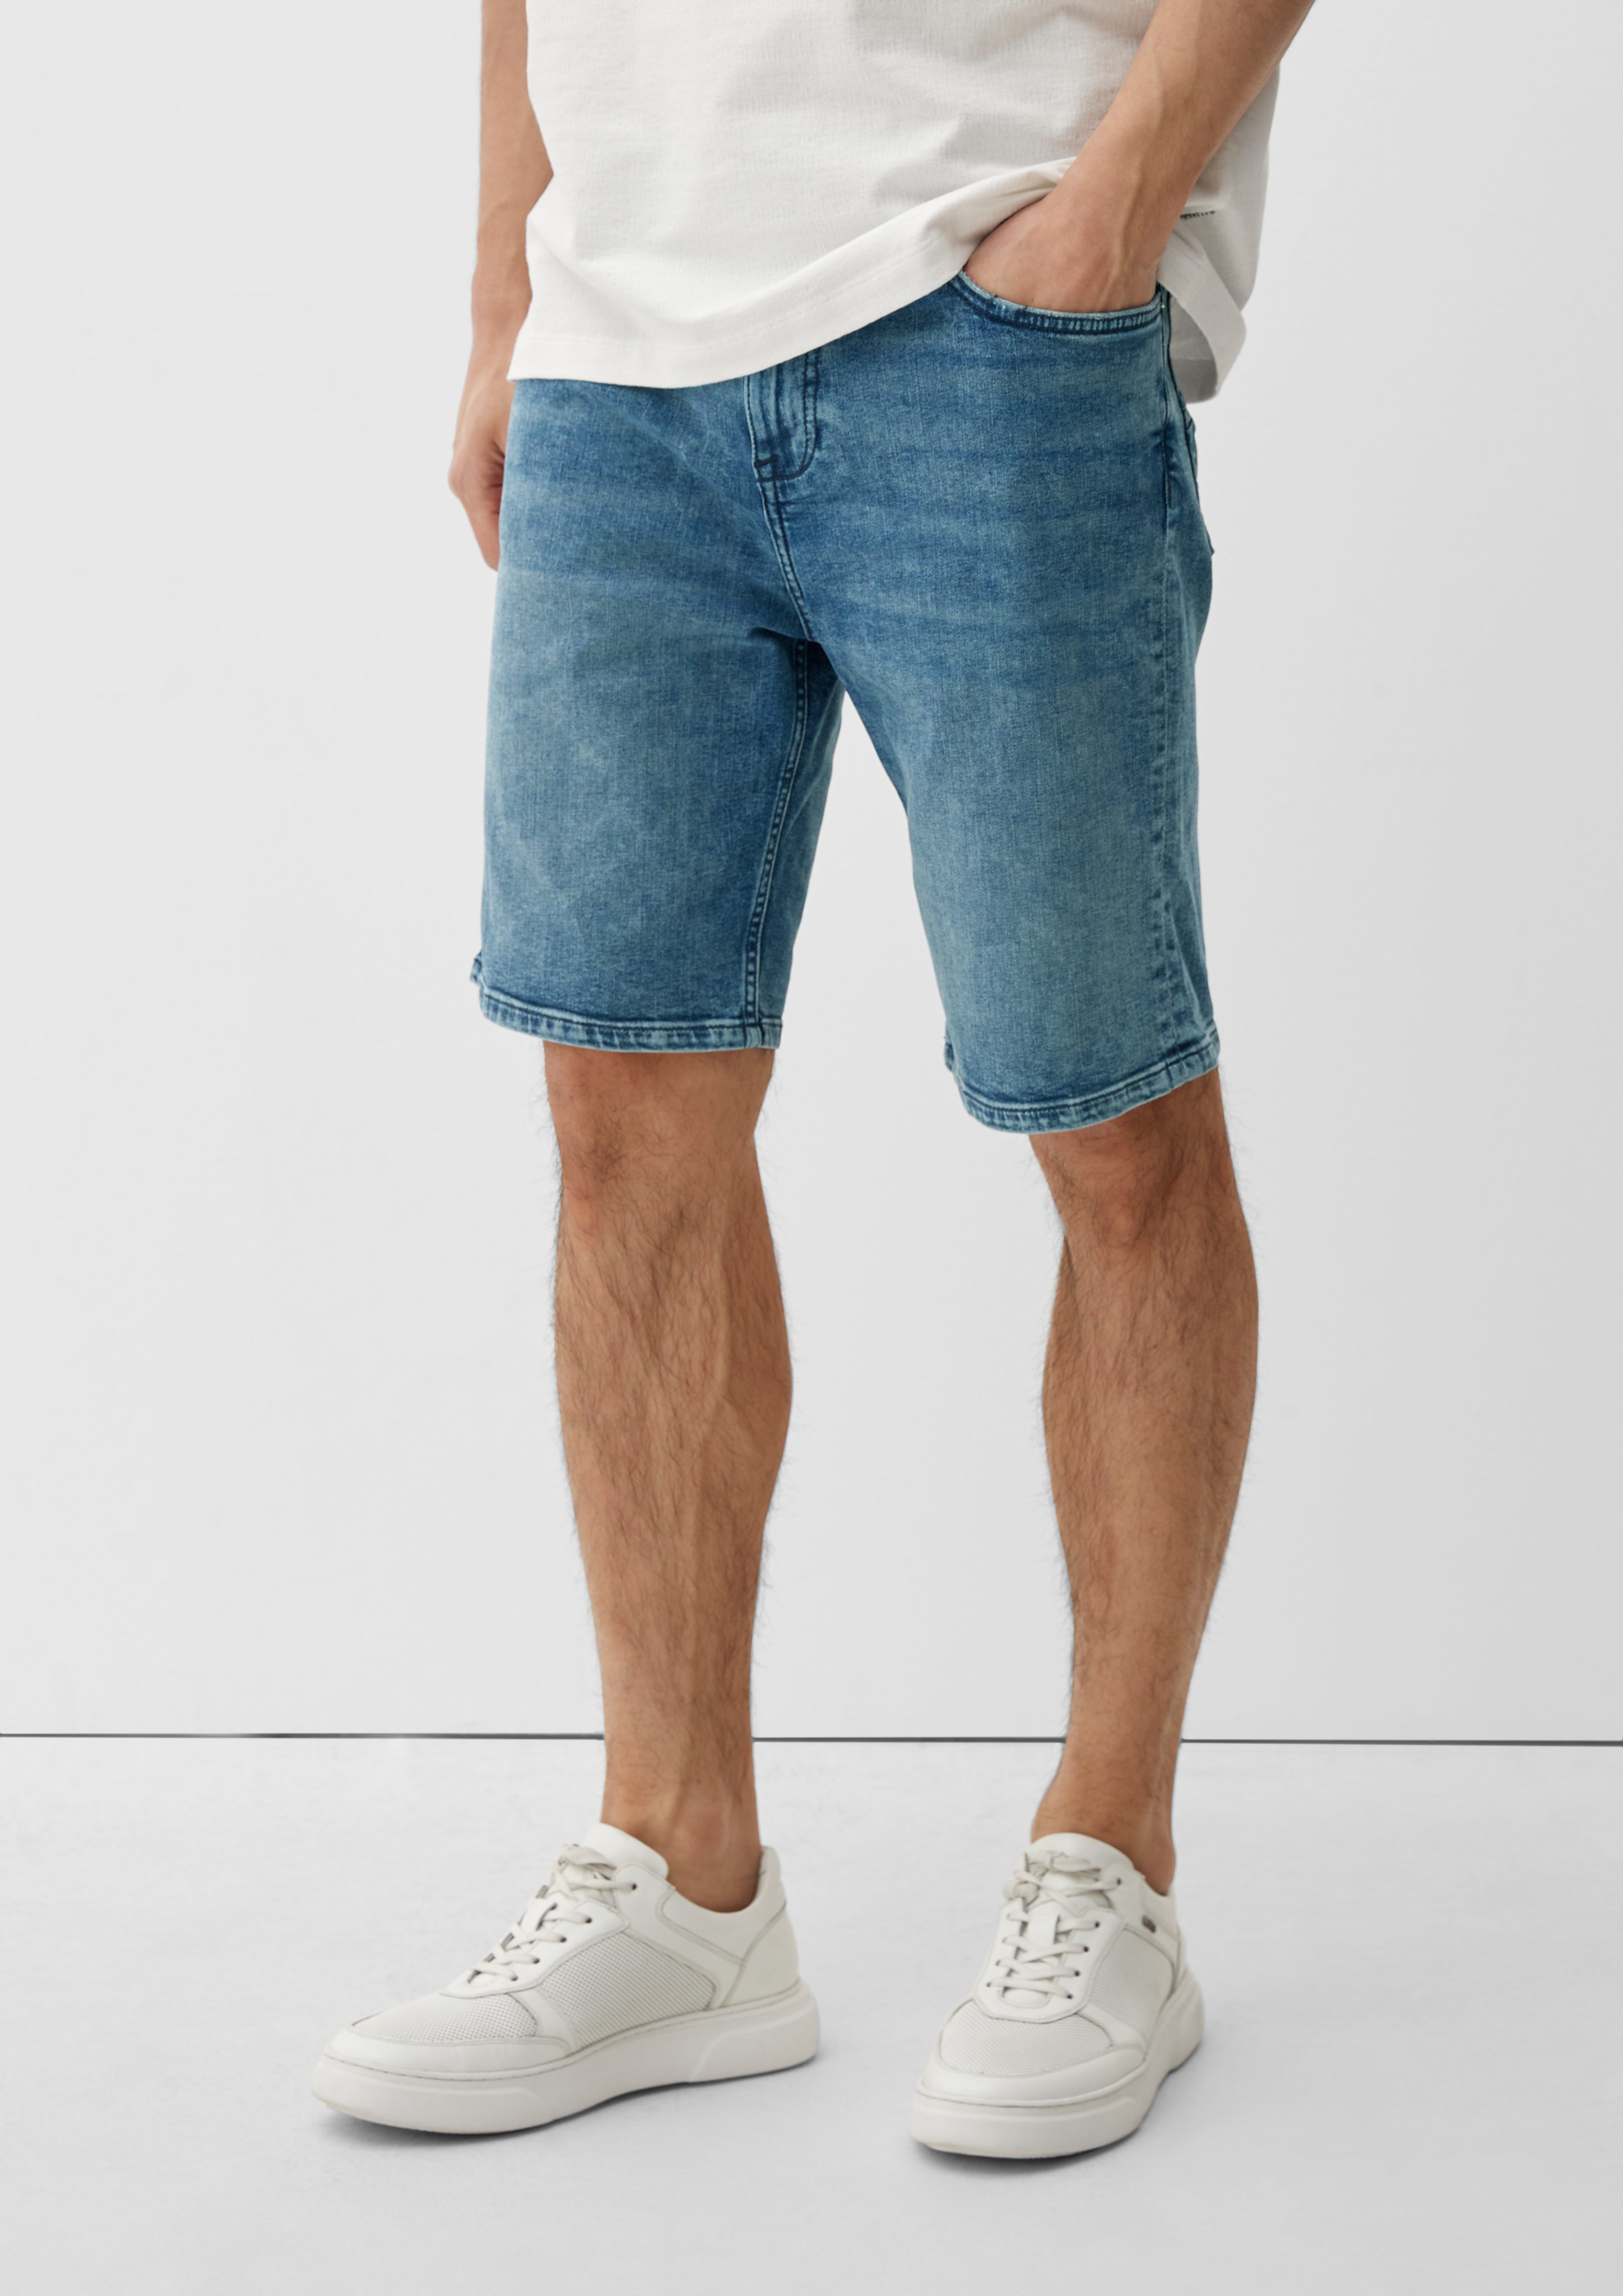 s.Oliver Jeansshorts Jeans Keith / Slim Fit / Mid Rise / Straight Leg himmelblau